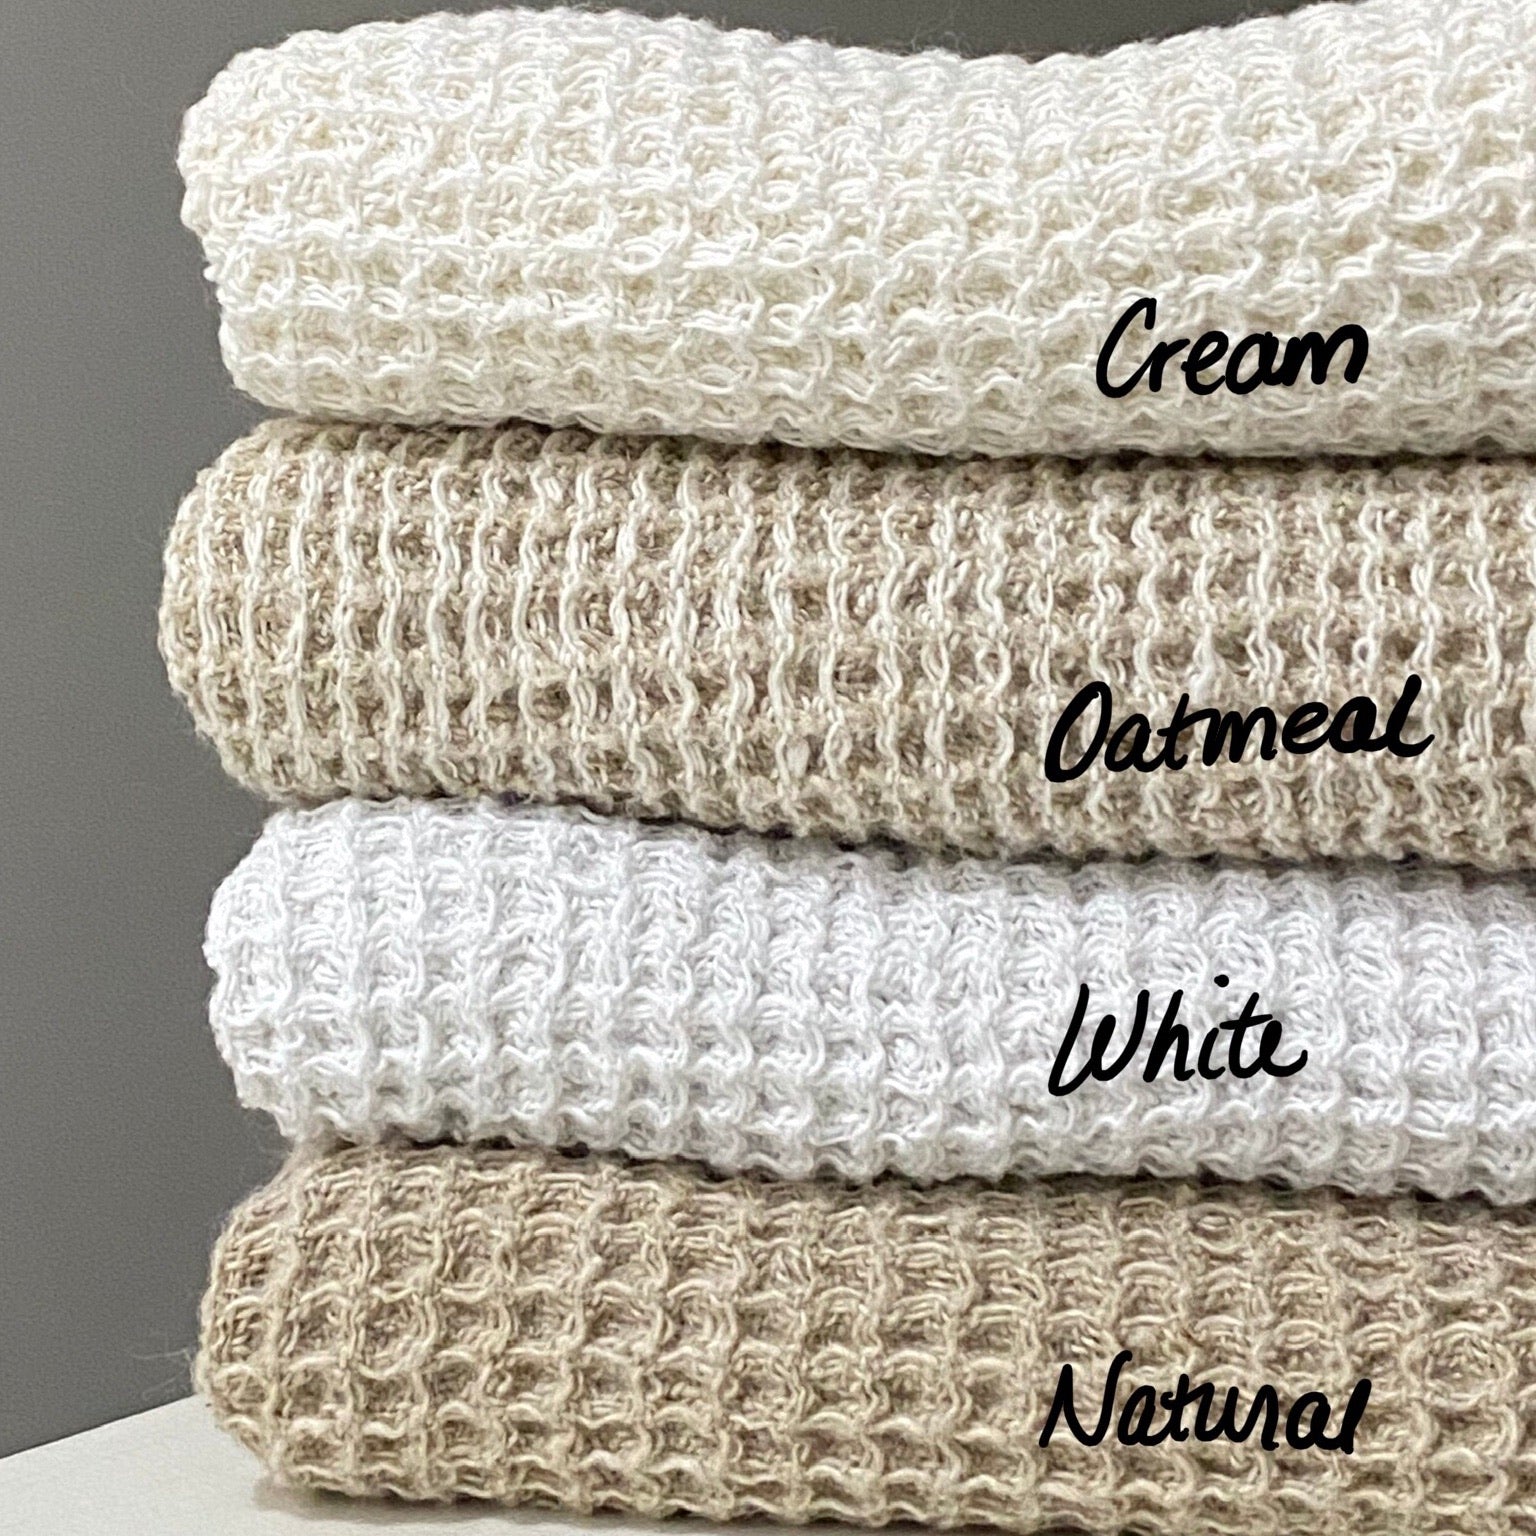  LinenMe Washed Waffle Linen Hand Towels, 20 in x 28 in